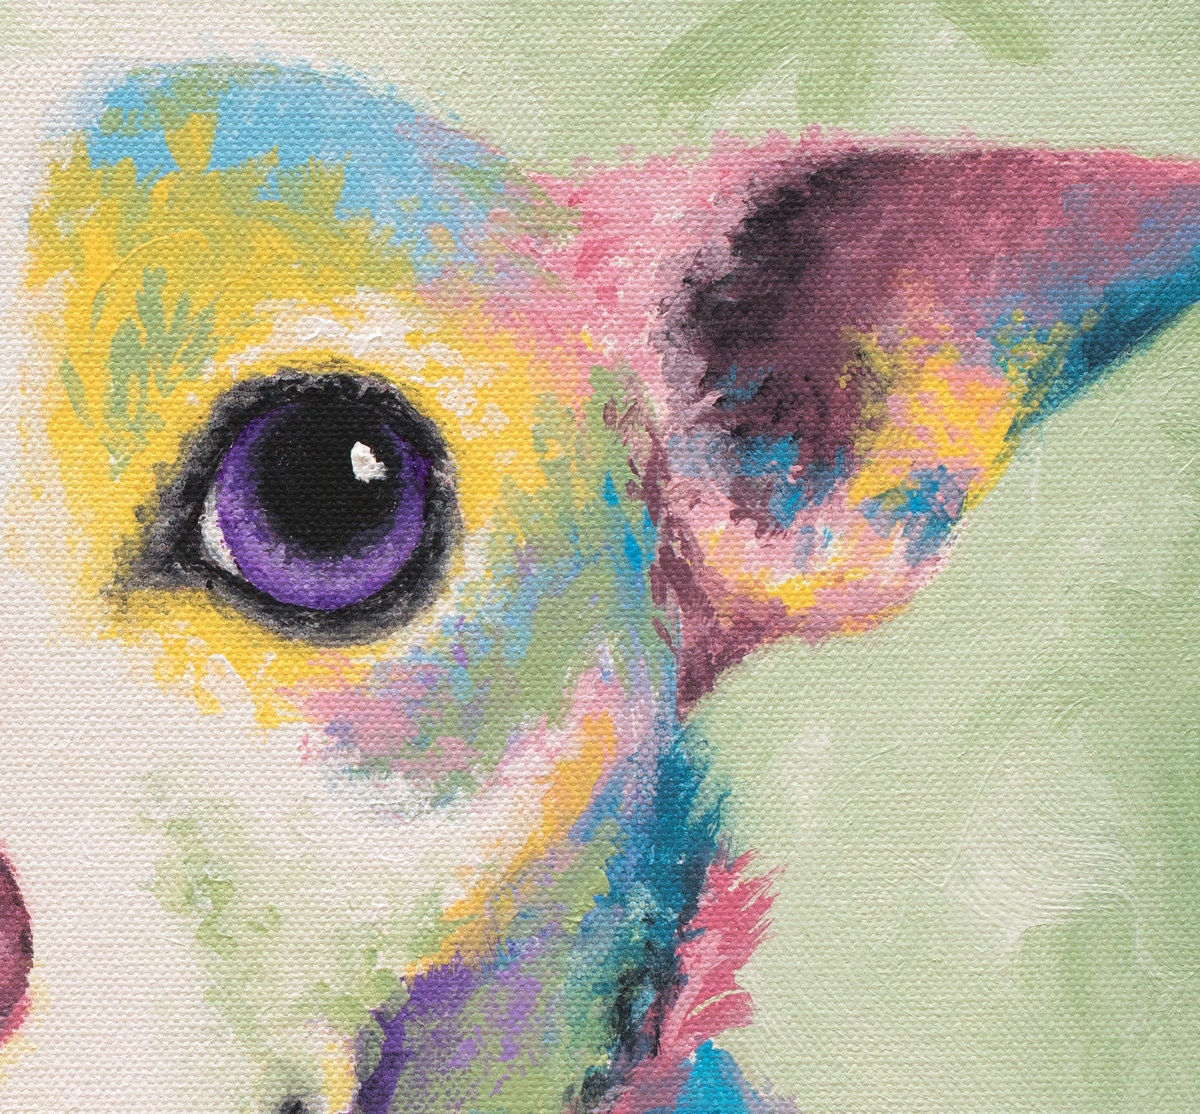 Chihuahua Art - Chihuahua Gifts. Chiwawa Wall Decor. Print on CANVAS or PAPER of Chihuahua Painting by Krystle Cole